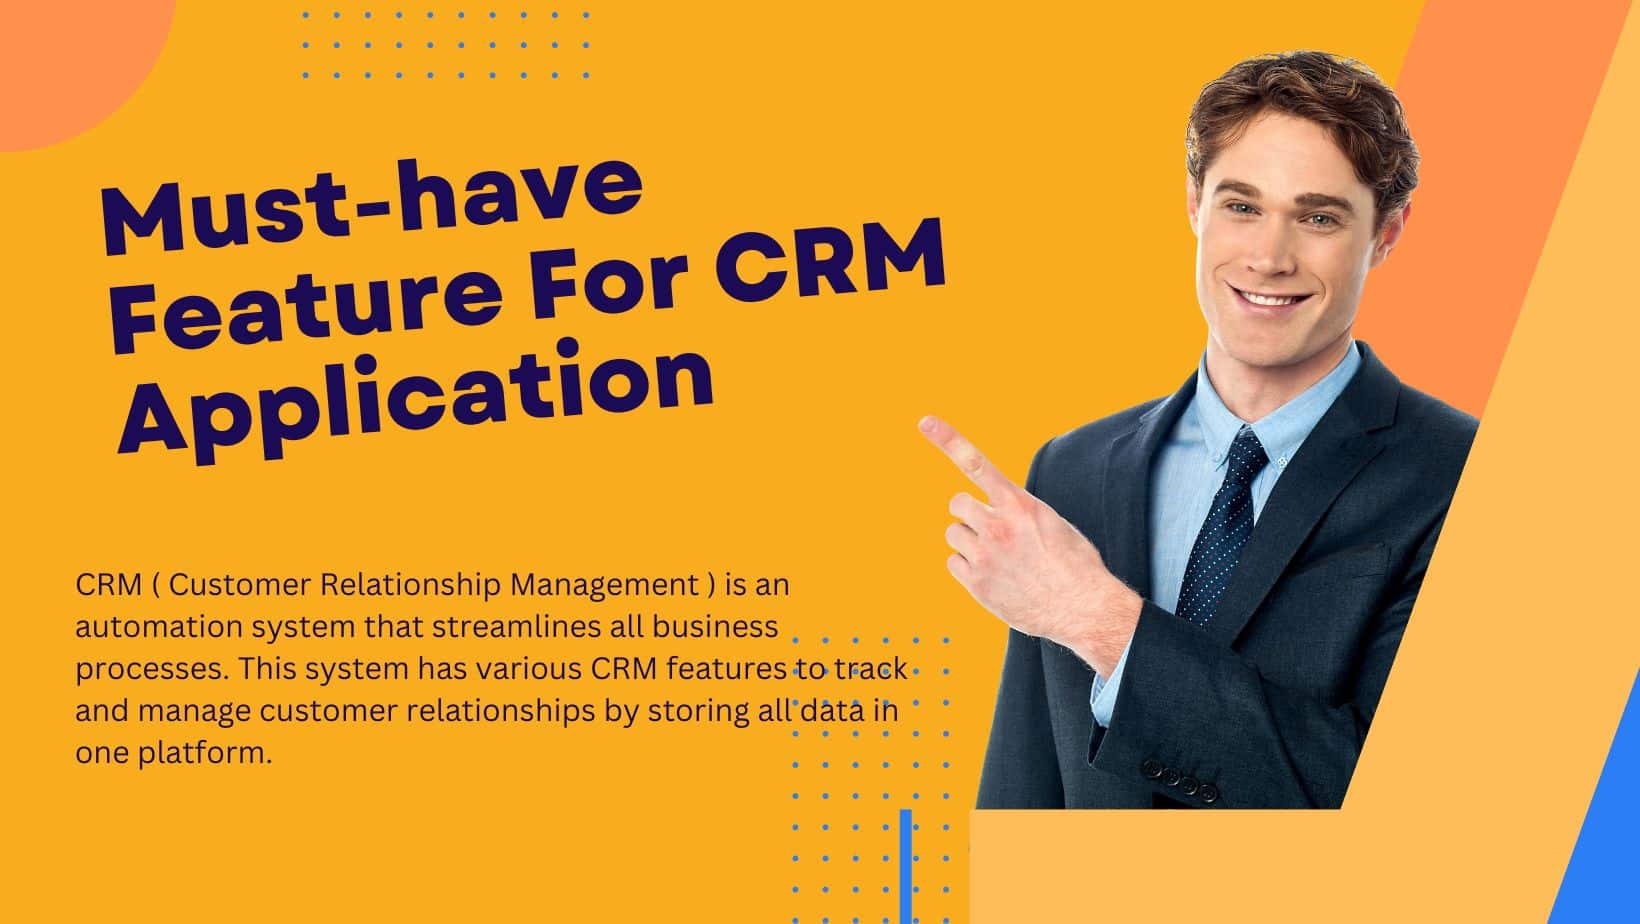 Must-have Feature For CRM Applications To Drive Business Growth